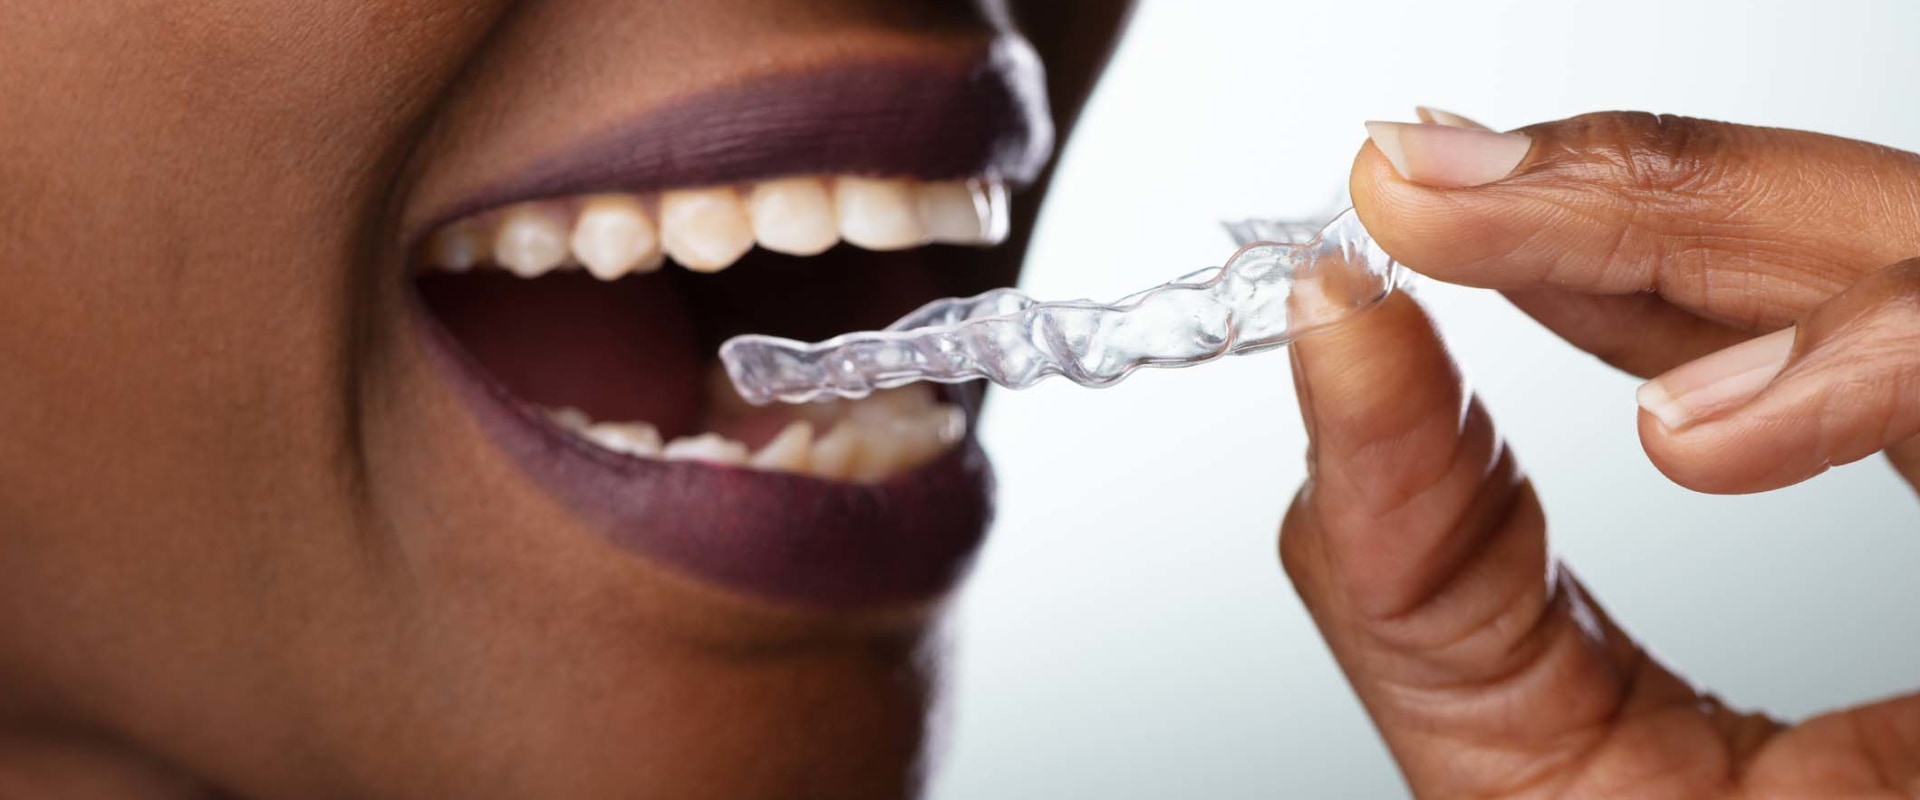 The Cost of At-Home Teeth Whitening Kits